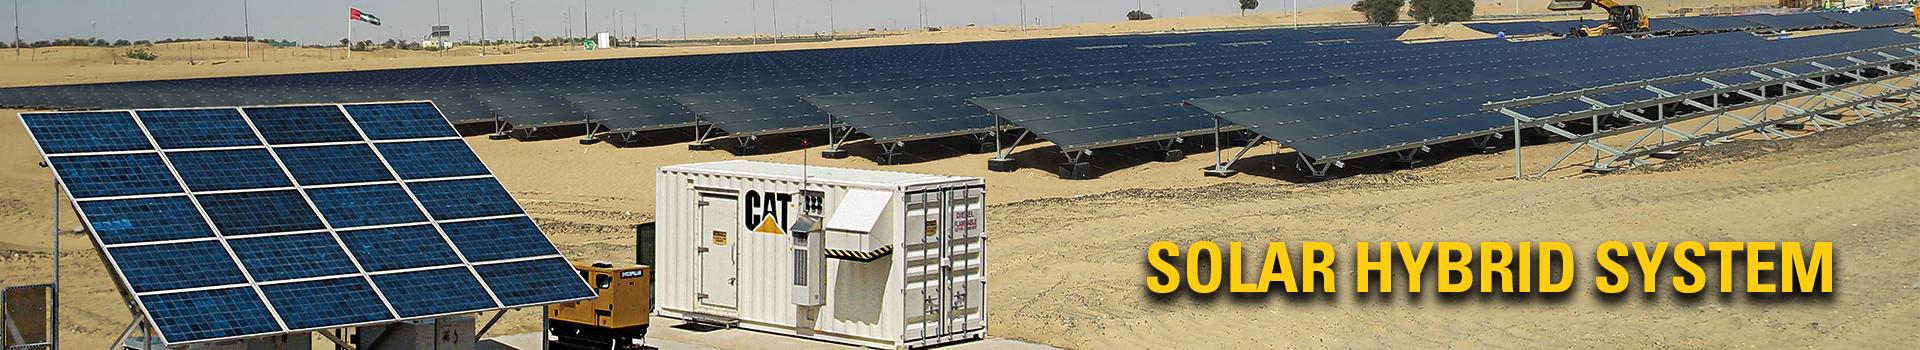 Product Caterpillar Microgrid Companies and PV Solar Panels System, Solar Power Solutions, Solar Generators, Solar Electric Power Generation, Solar System Electricity Generation image